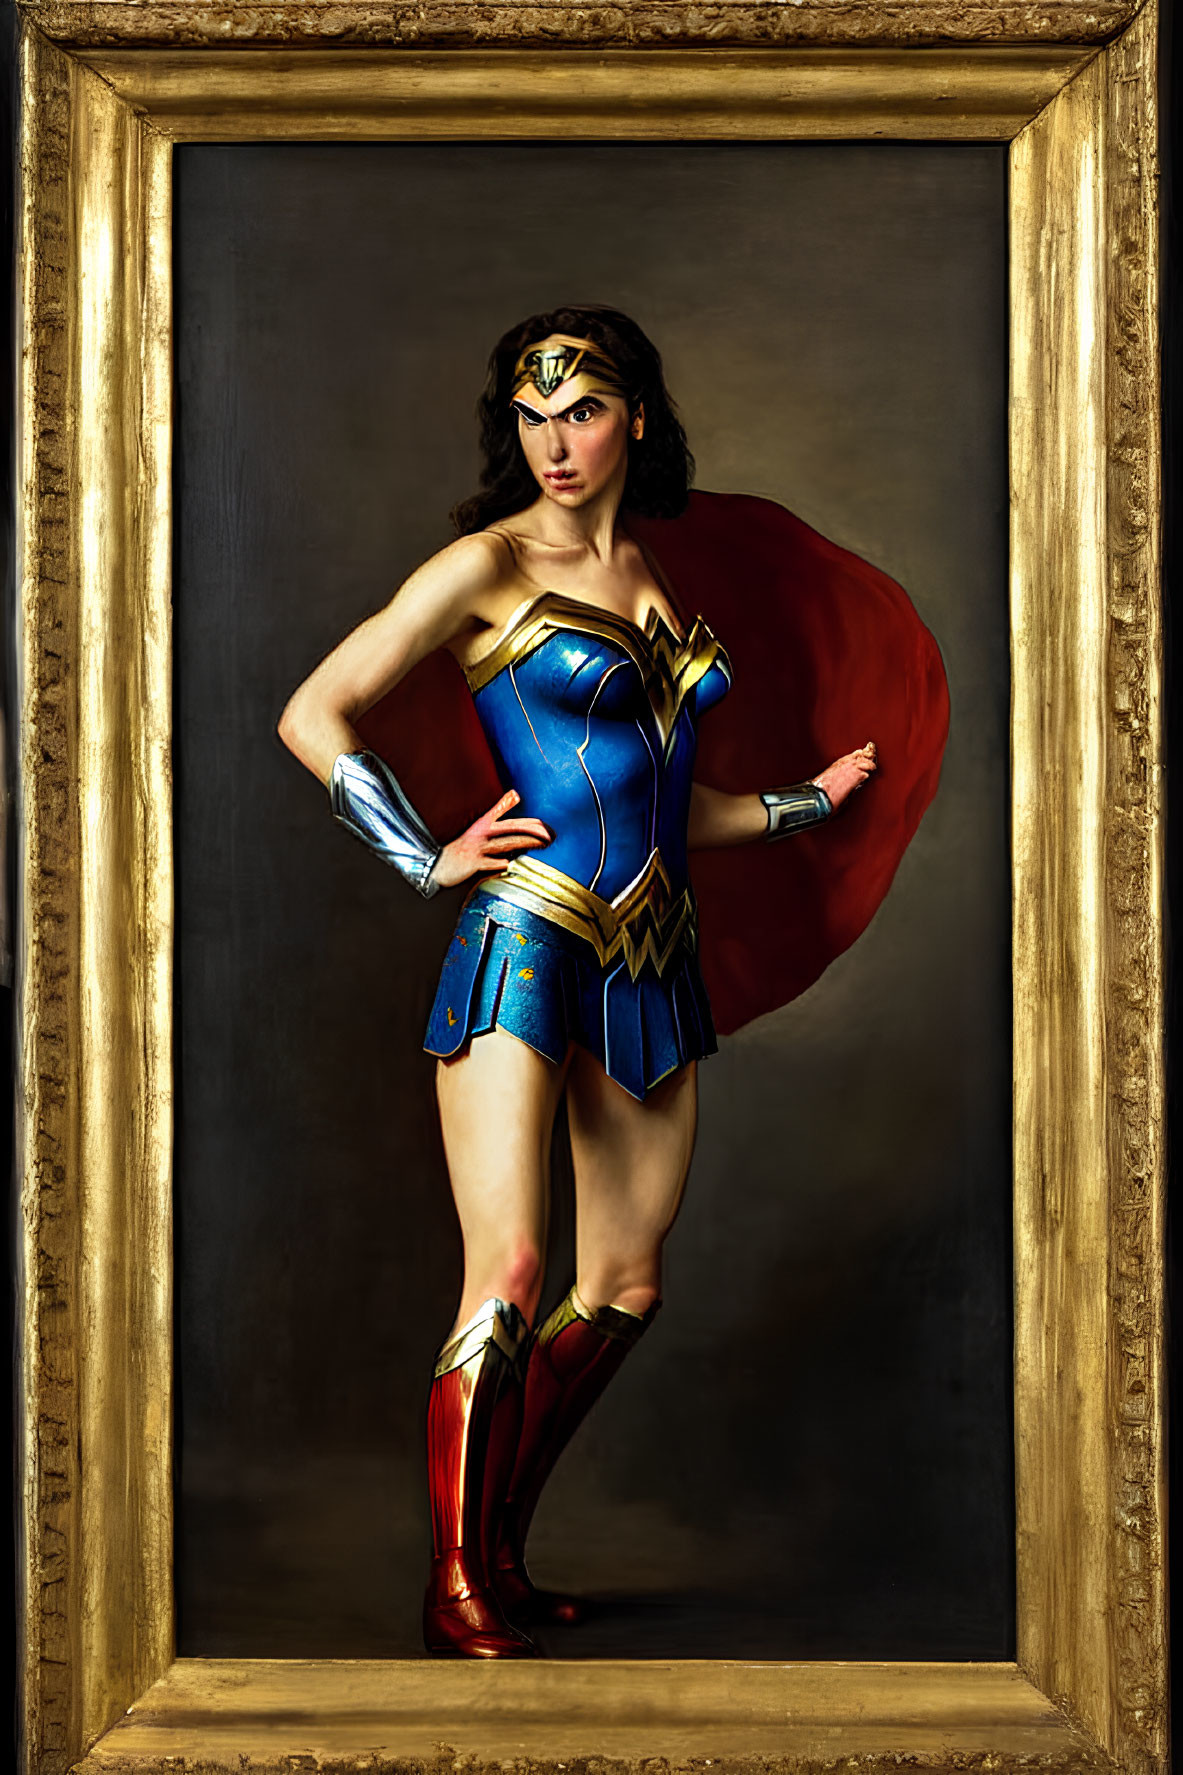 Person in Wonder Woman costume in classical portrait style frame